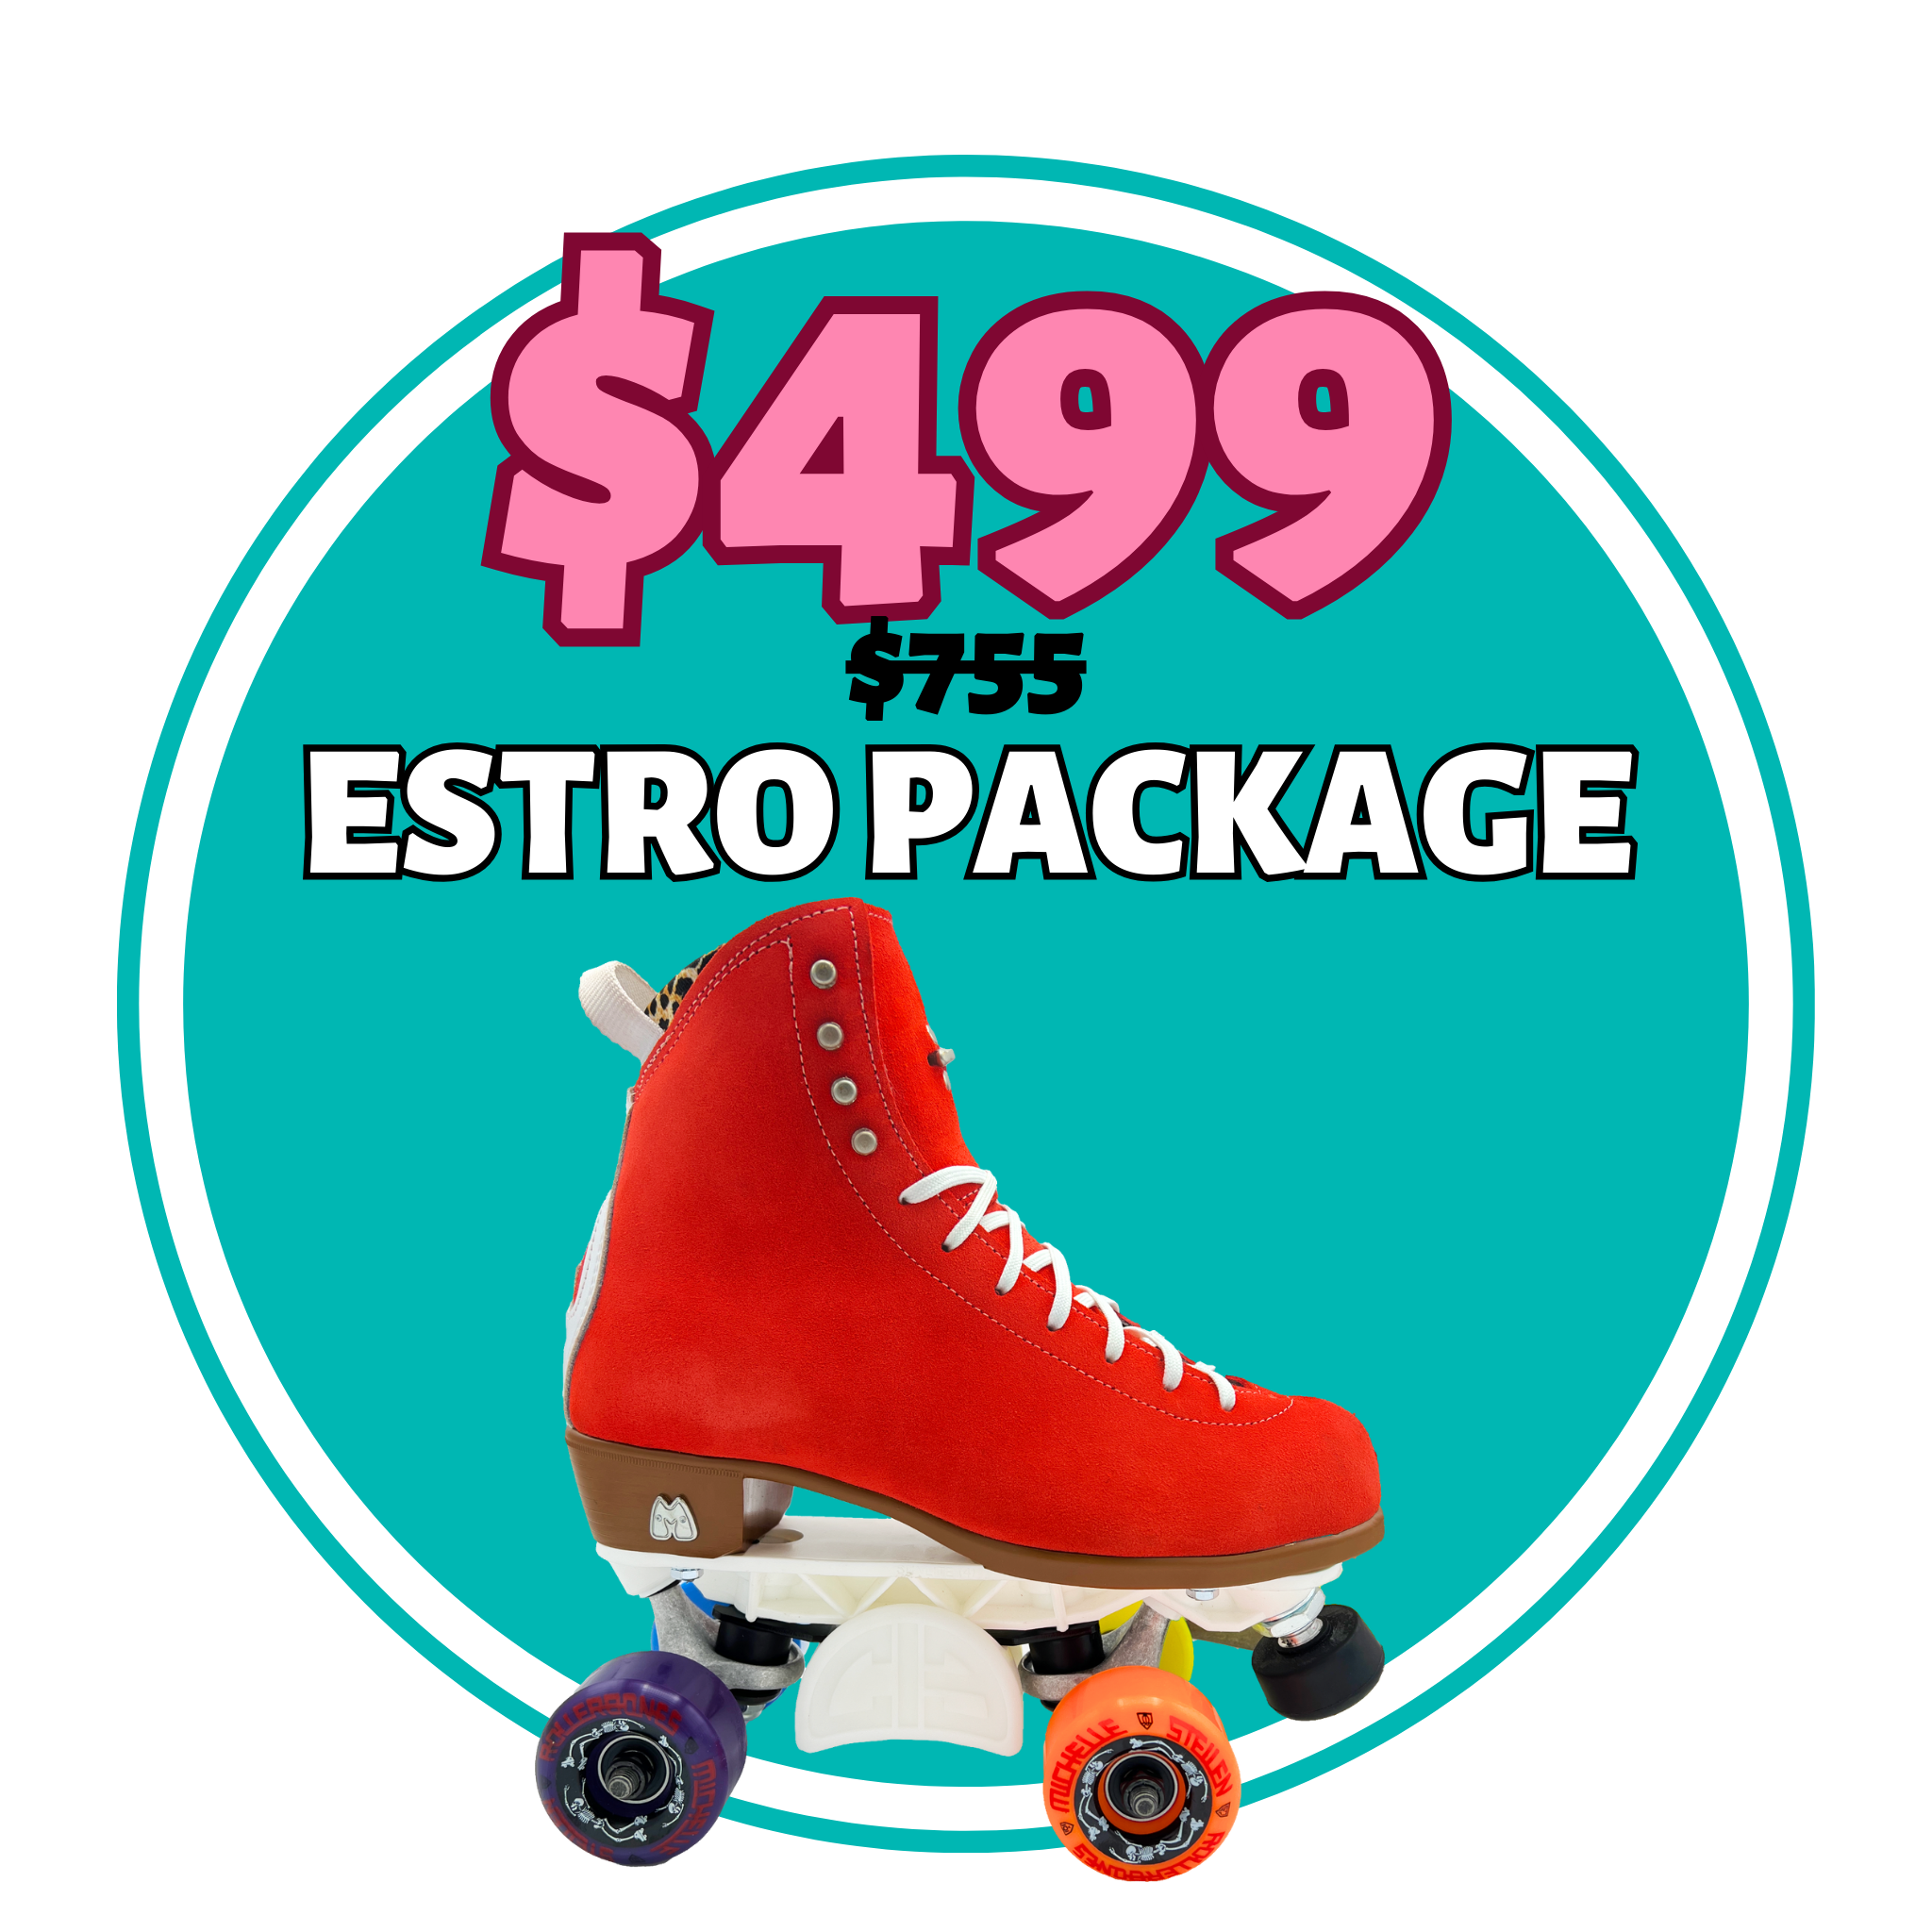 Estro Package. Regularly $755, on sale for $499